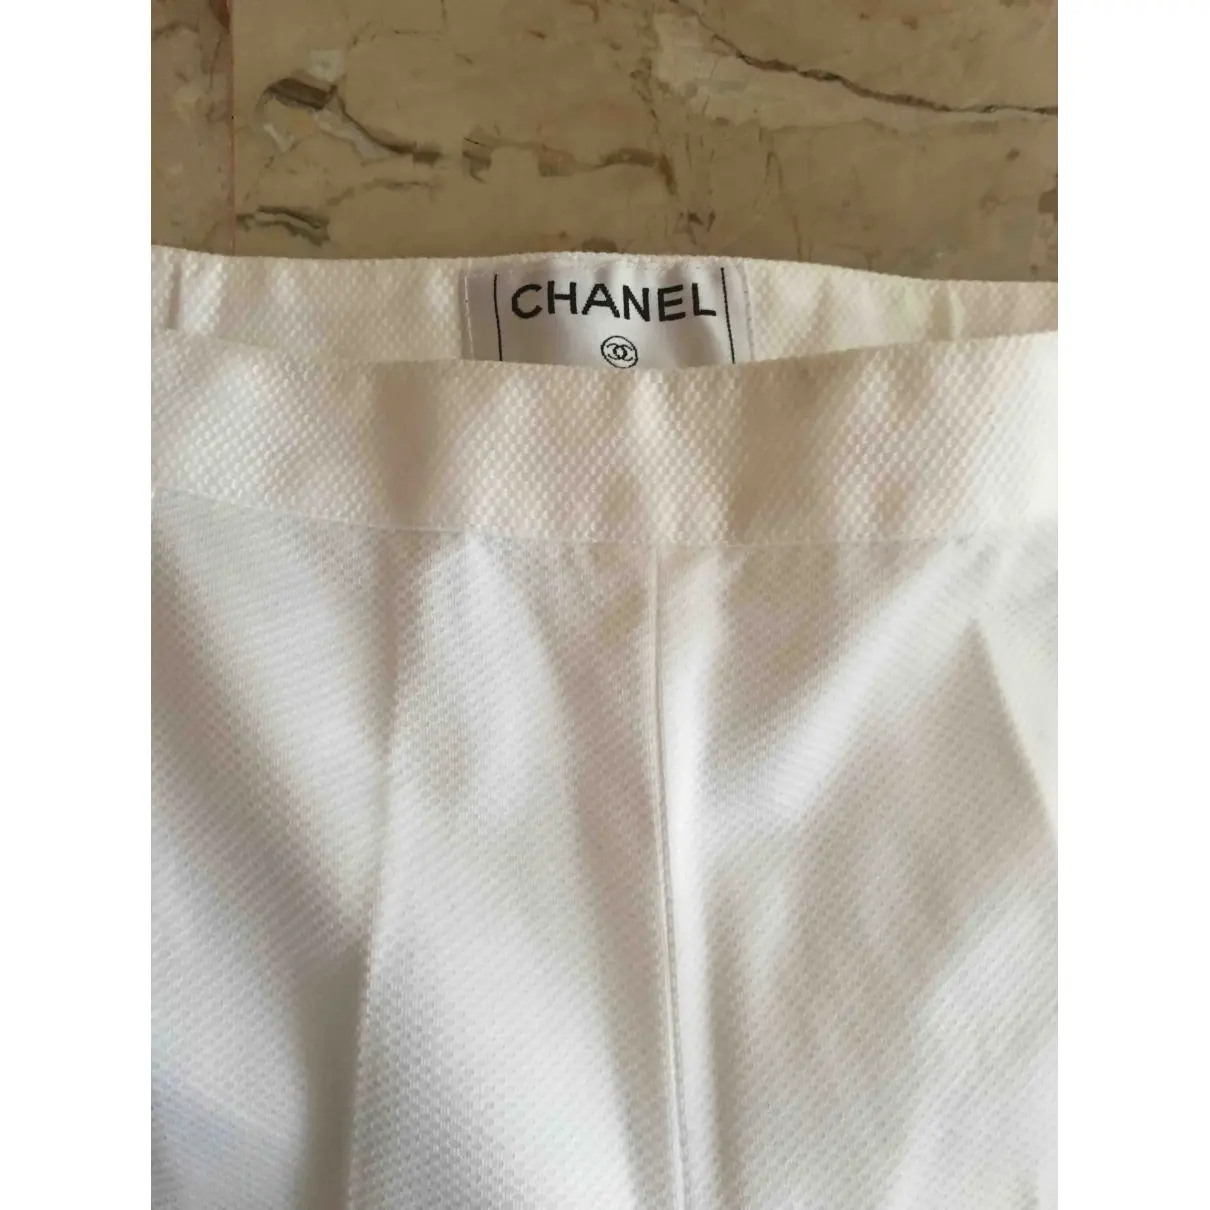 Chanel Straight pants for sale - Vintage